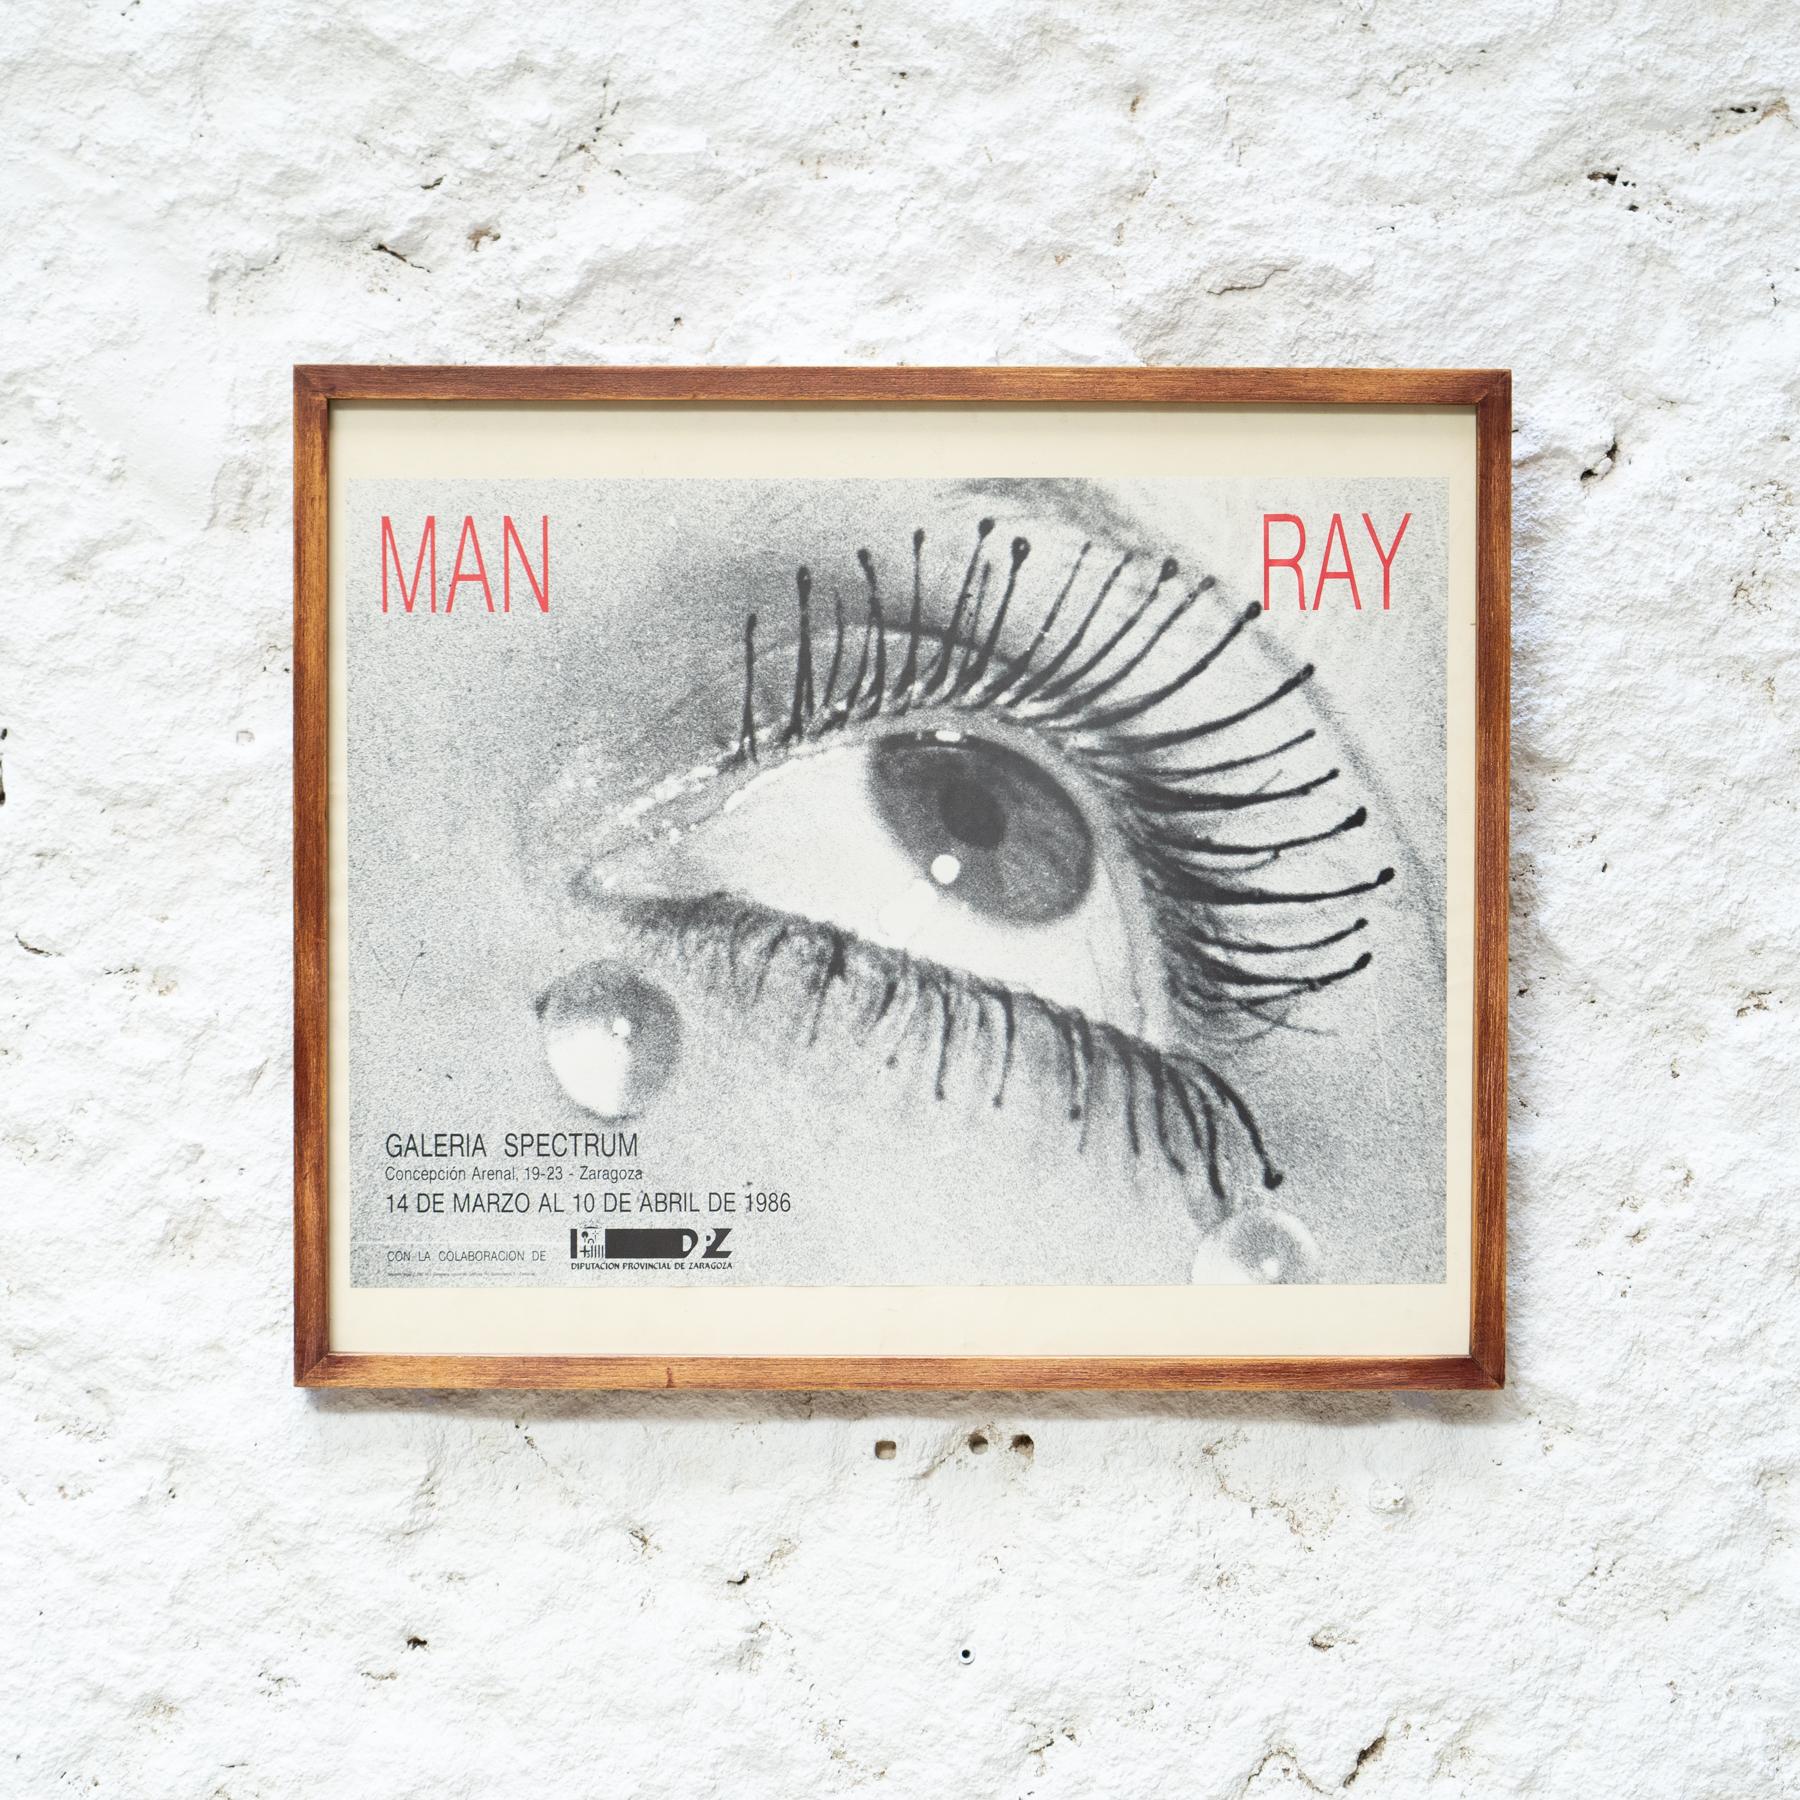 Framed Poster of Man Ray Exhibition in Galeria Spectrum Zaragoza, 1986

In original condition, with minor wear consistent of age and use, preserving a beautiful patina